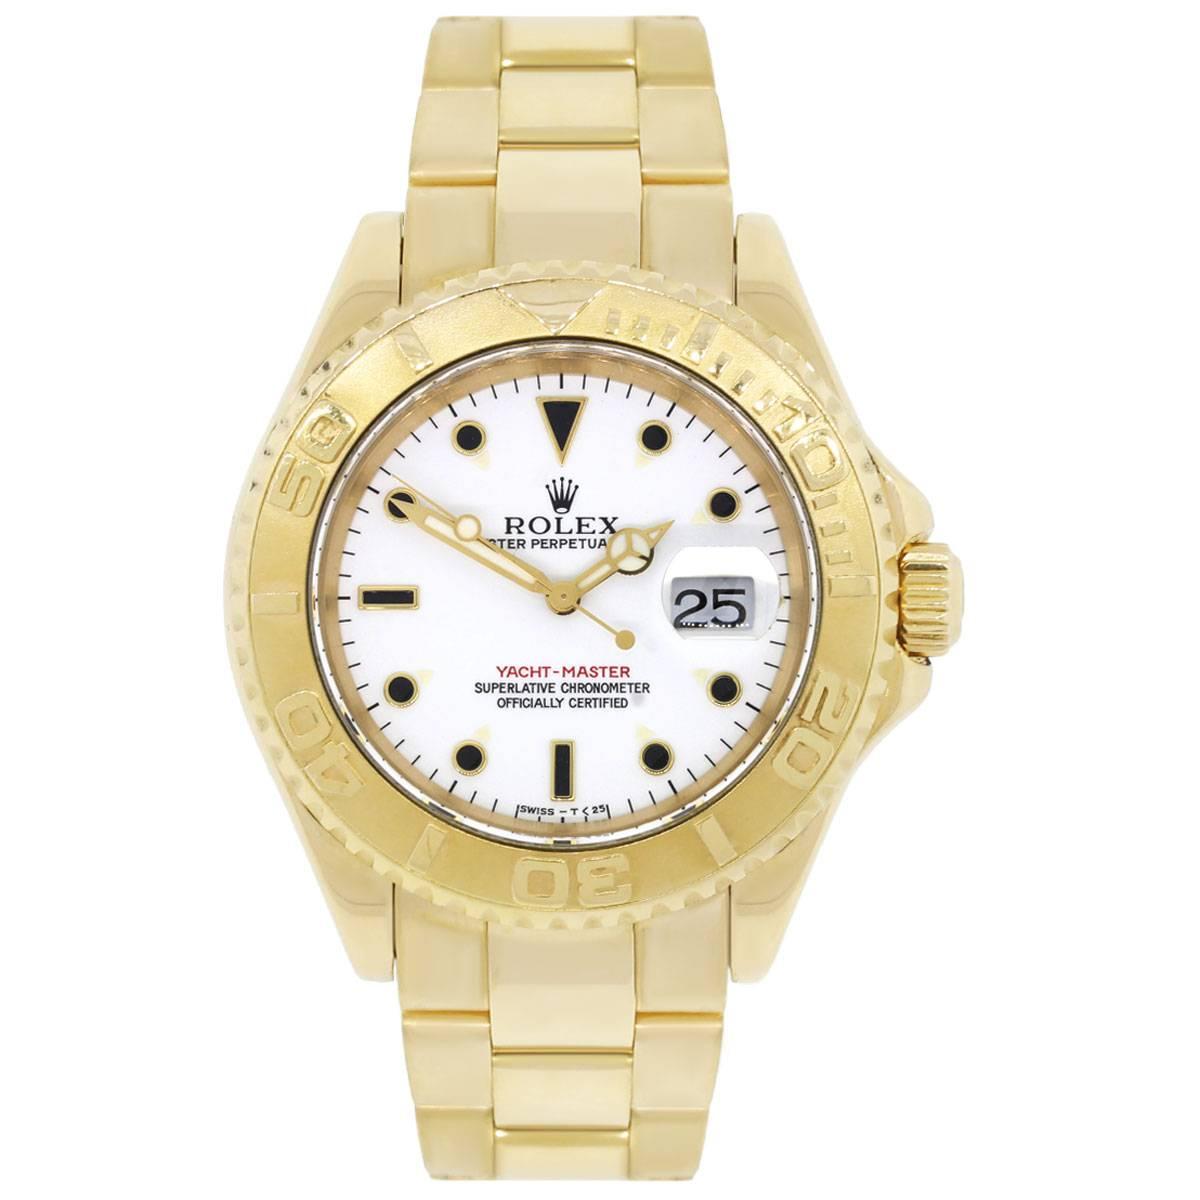 Brand: Rolex
MPN: 16628
Model: Yachtmaster
Case Material: 18k yellow gold
Case Diameter: 40mm
Crystal: Sapphire crystal (scratch resistant)
Bezel: 18k yellow gold bidirectional bezel
Dial: White dial with black hour markers, gold hands and date